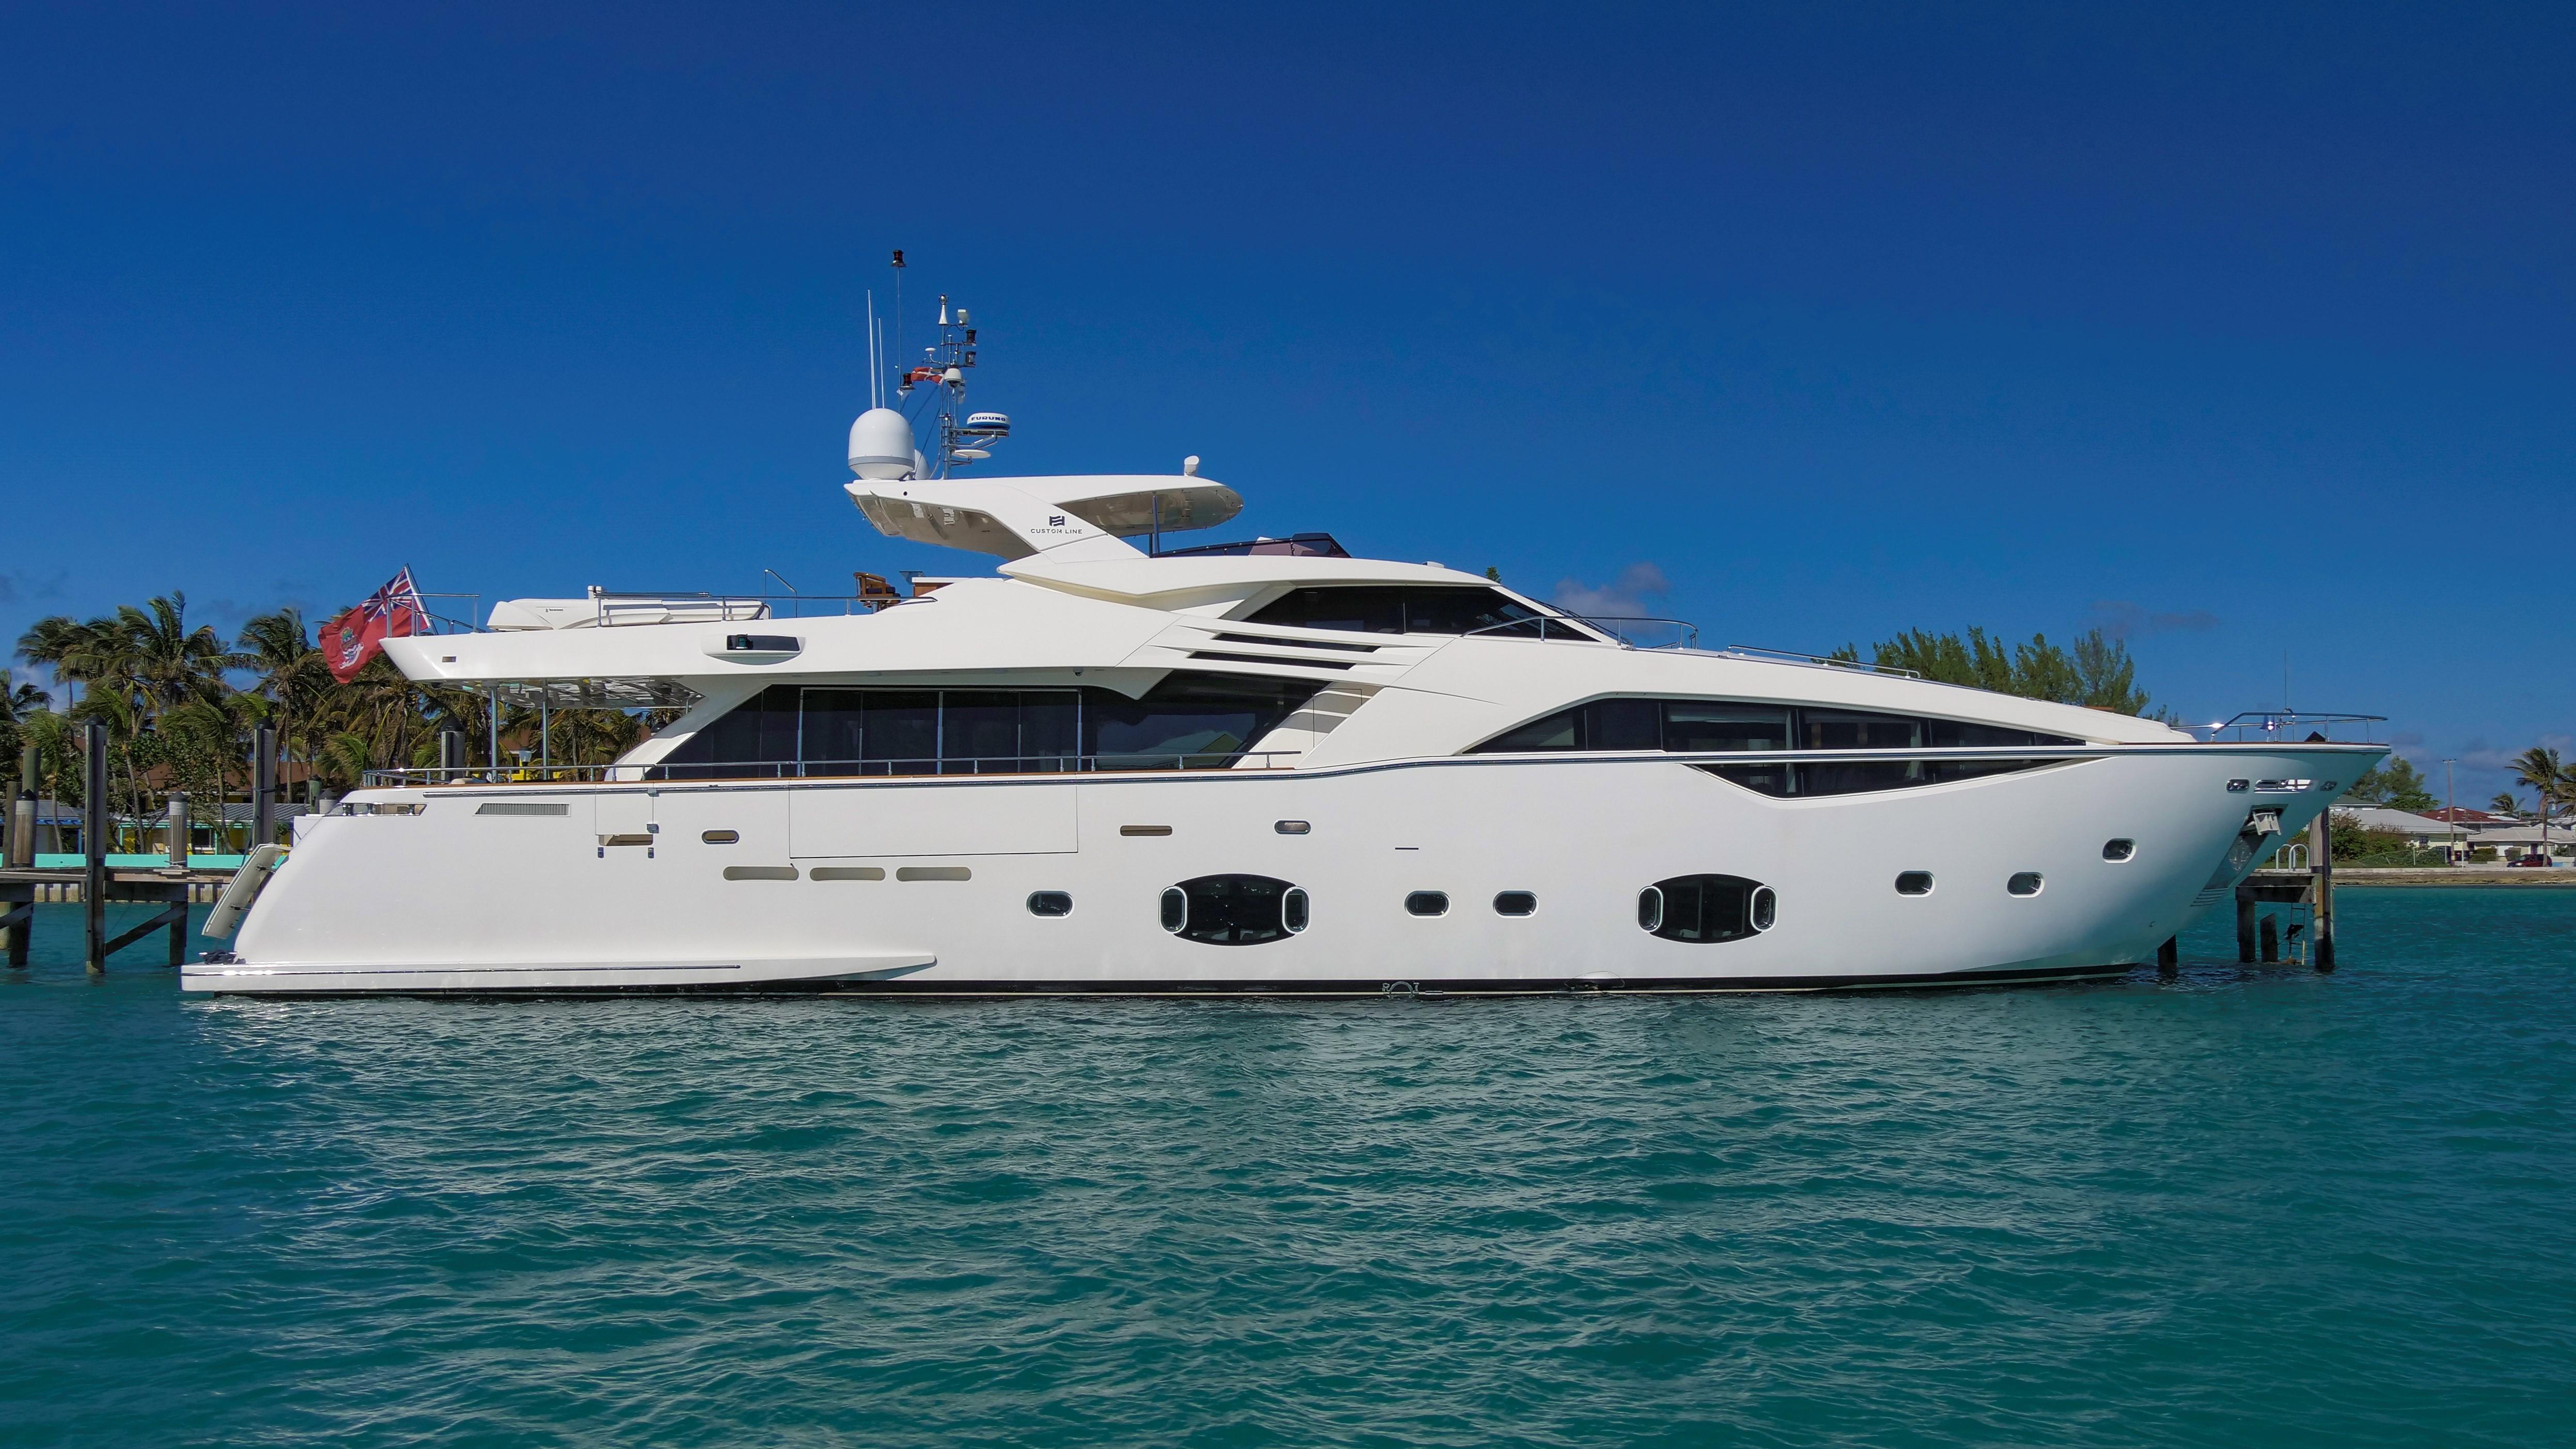 100 foot yacht for sale